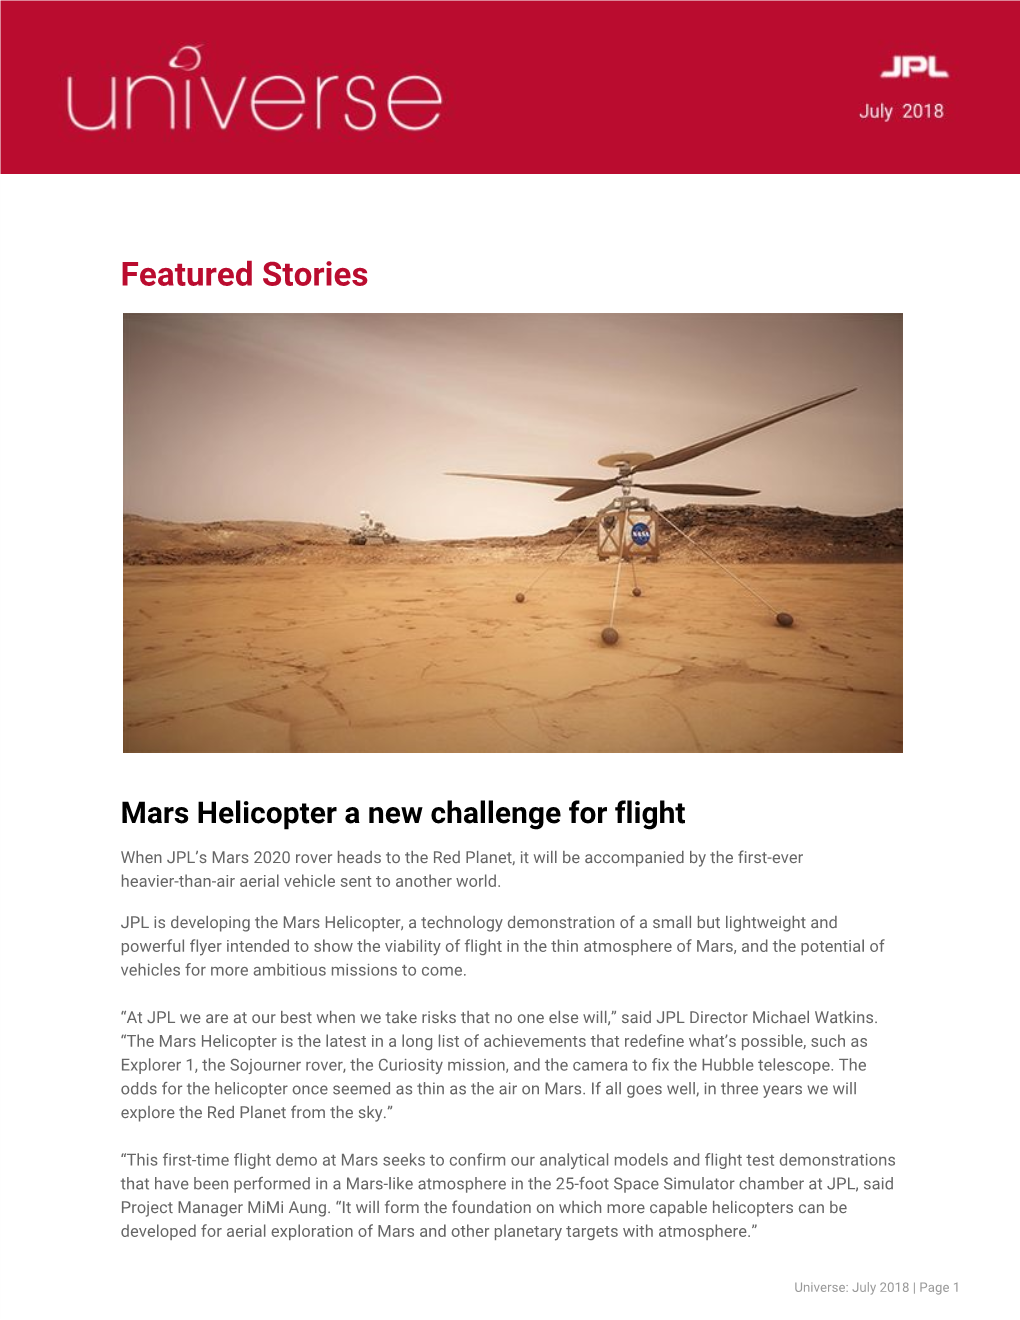 Mars Helicopter a New Challenge for Flight